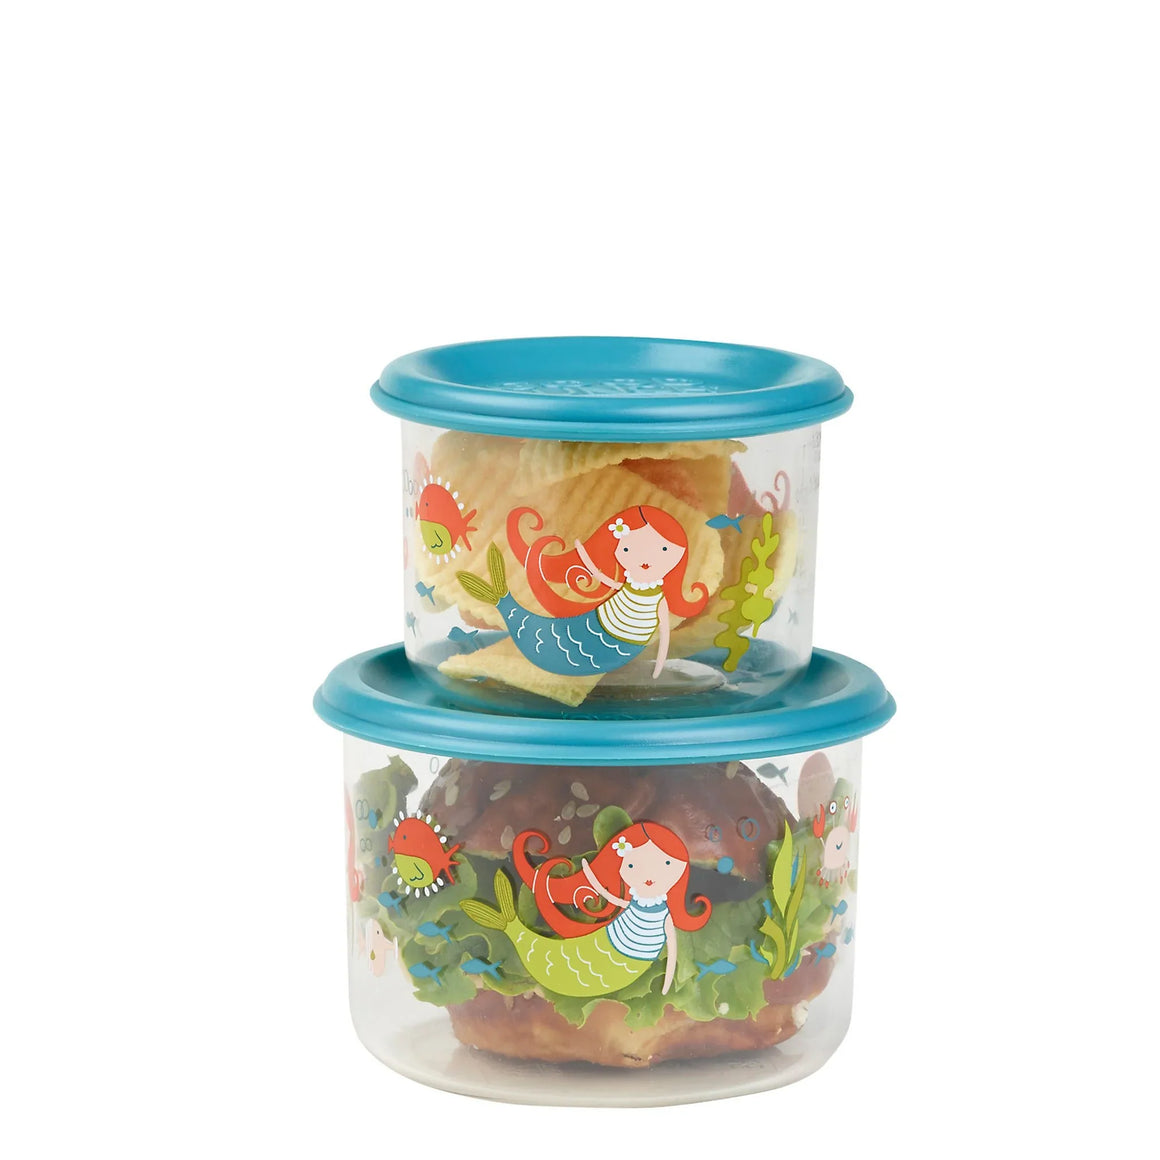 Isla The Mermaid - Good Lunch Containers - Small 2 pcs.